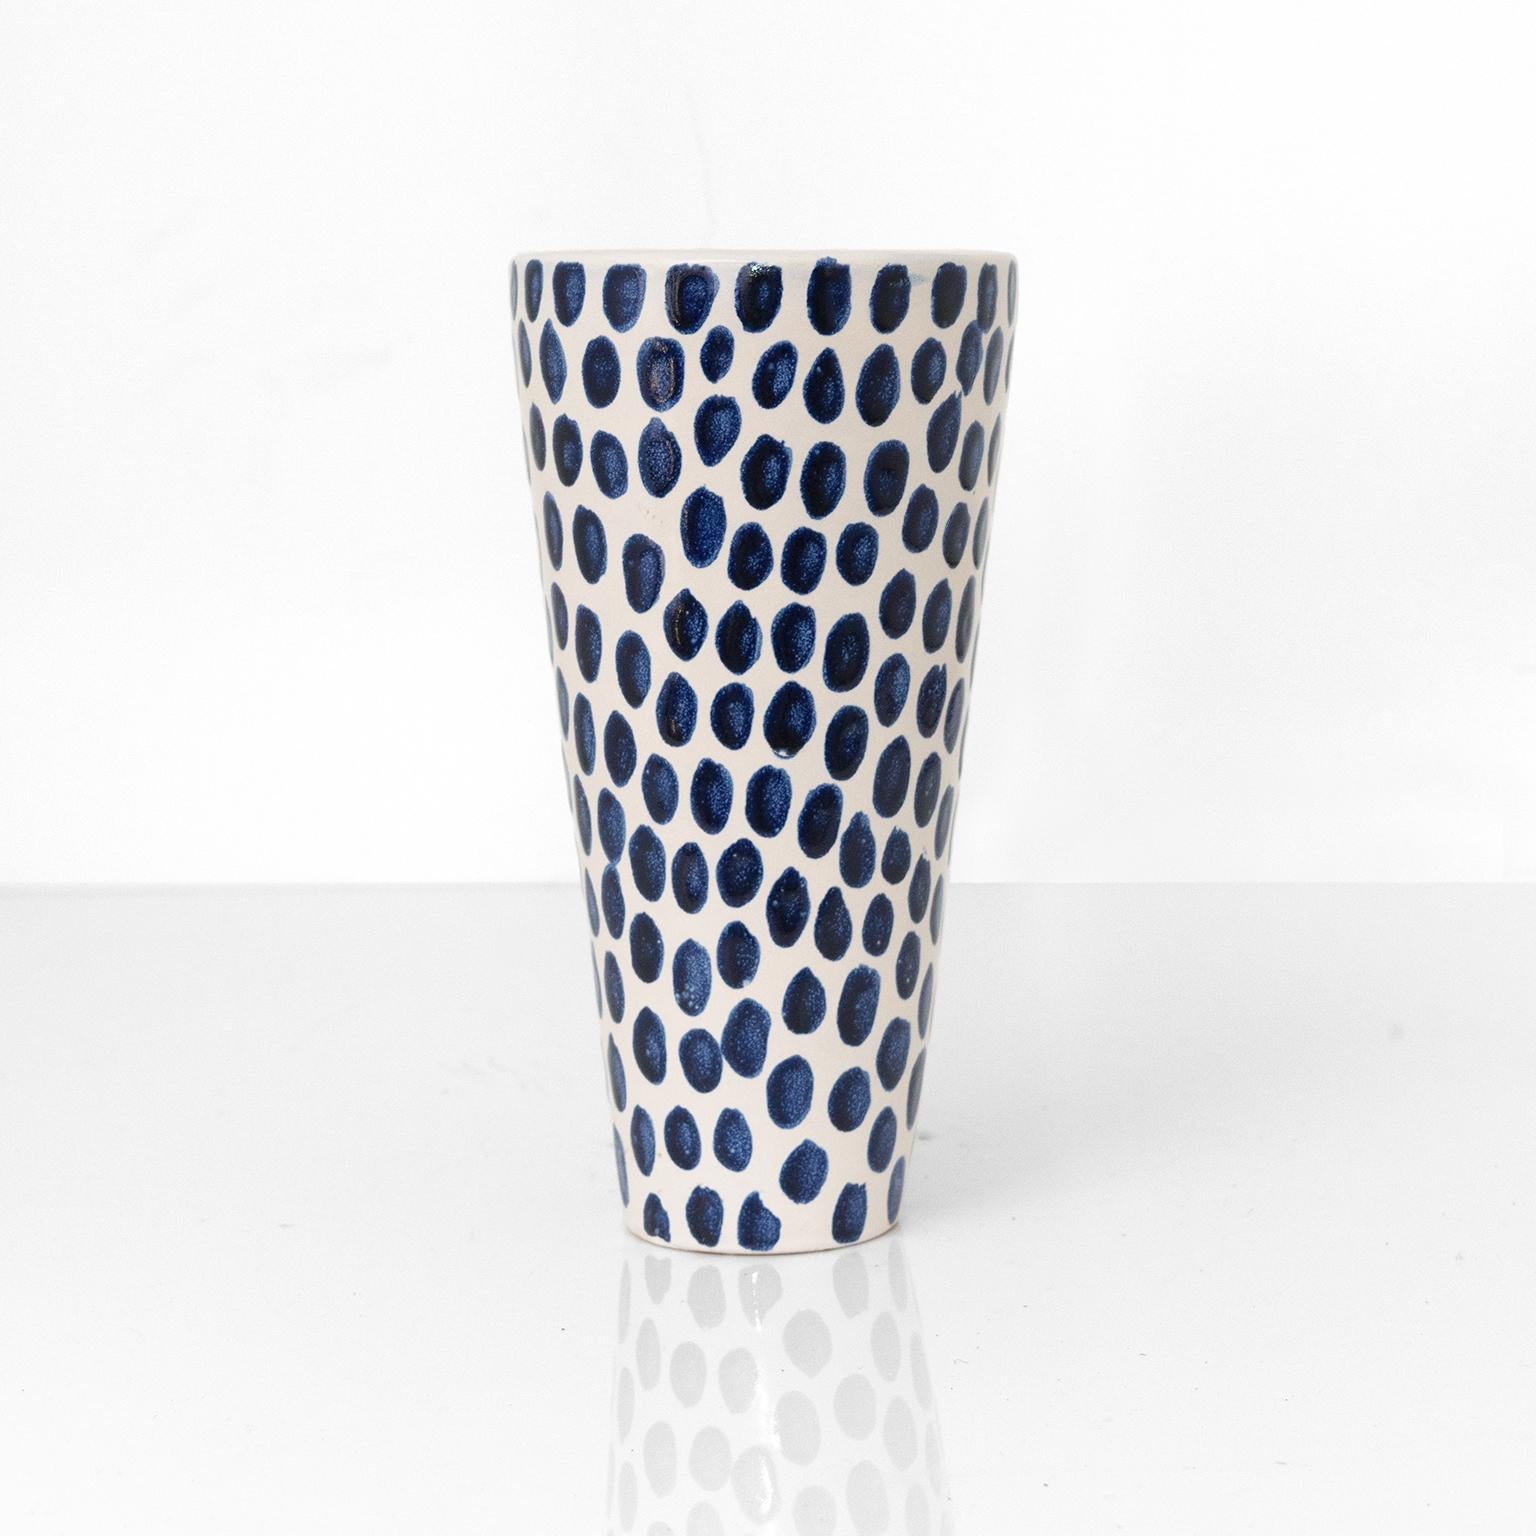 Vicke Lindstrand cone shaped spotted ceramic vase in hand decorated with blue spots on a white glazed body. Made by Lindstrand while at Upsala Ekeby, Sweden 1950’s. 

Measures: Height: 8.25“ Diameter: 4.25“.